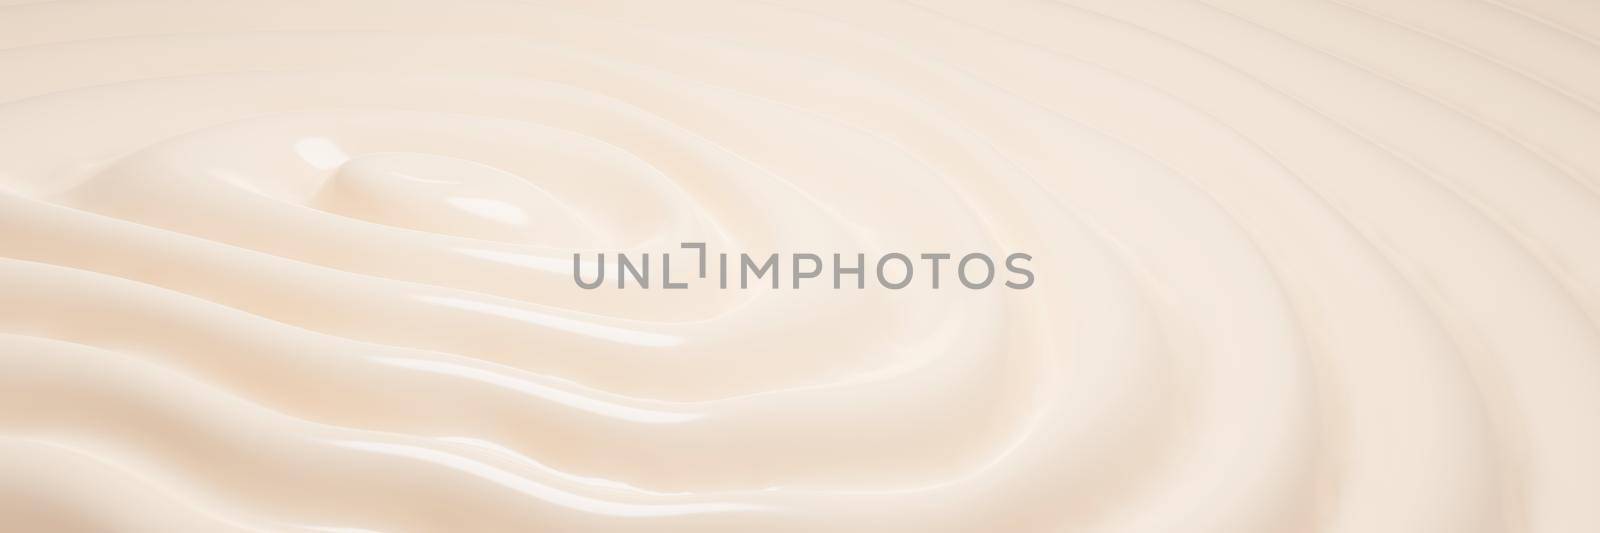 Cosmetic cream wavy background 3D render by Myimagine